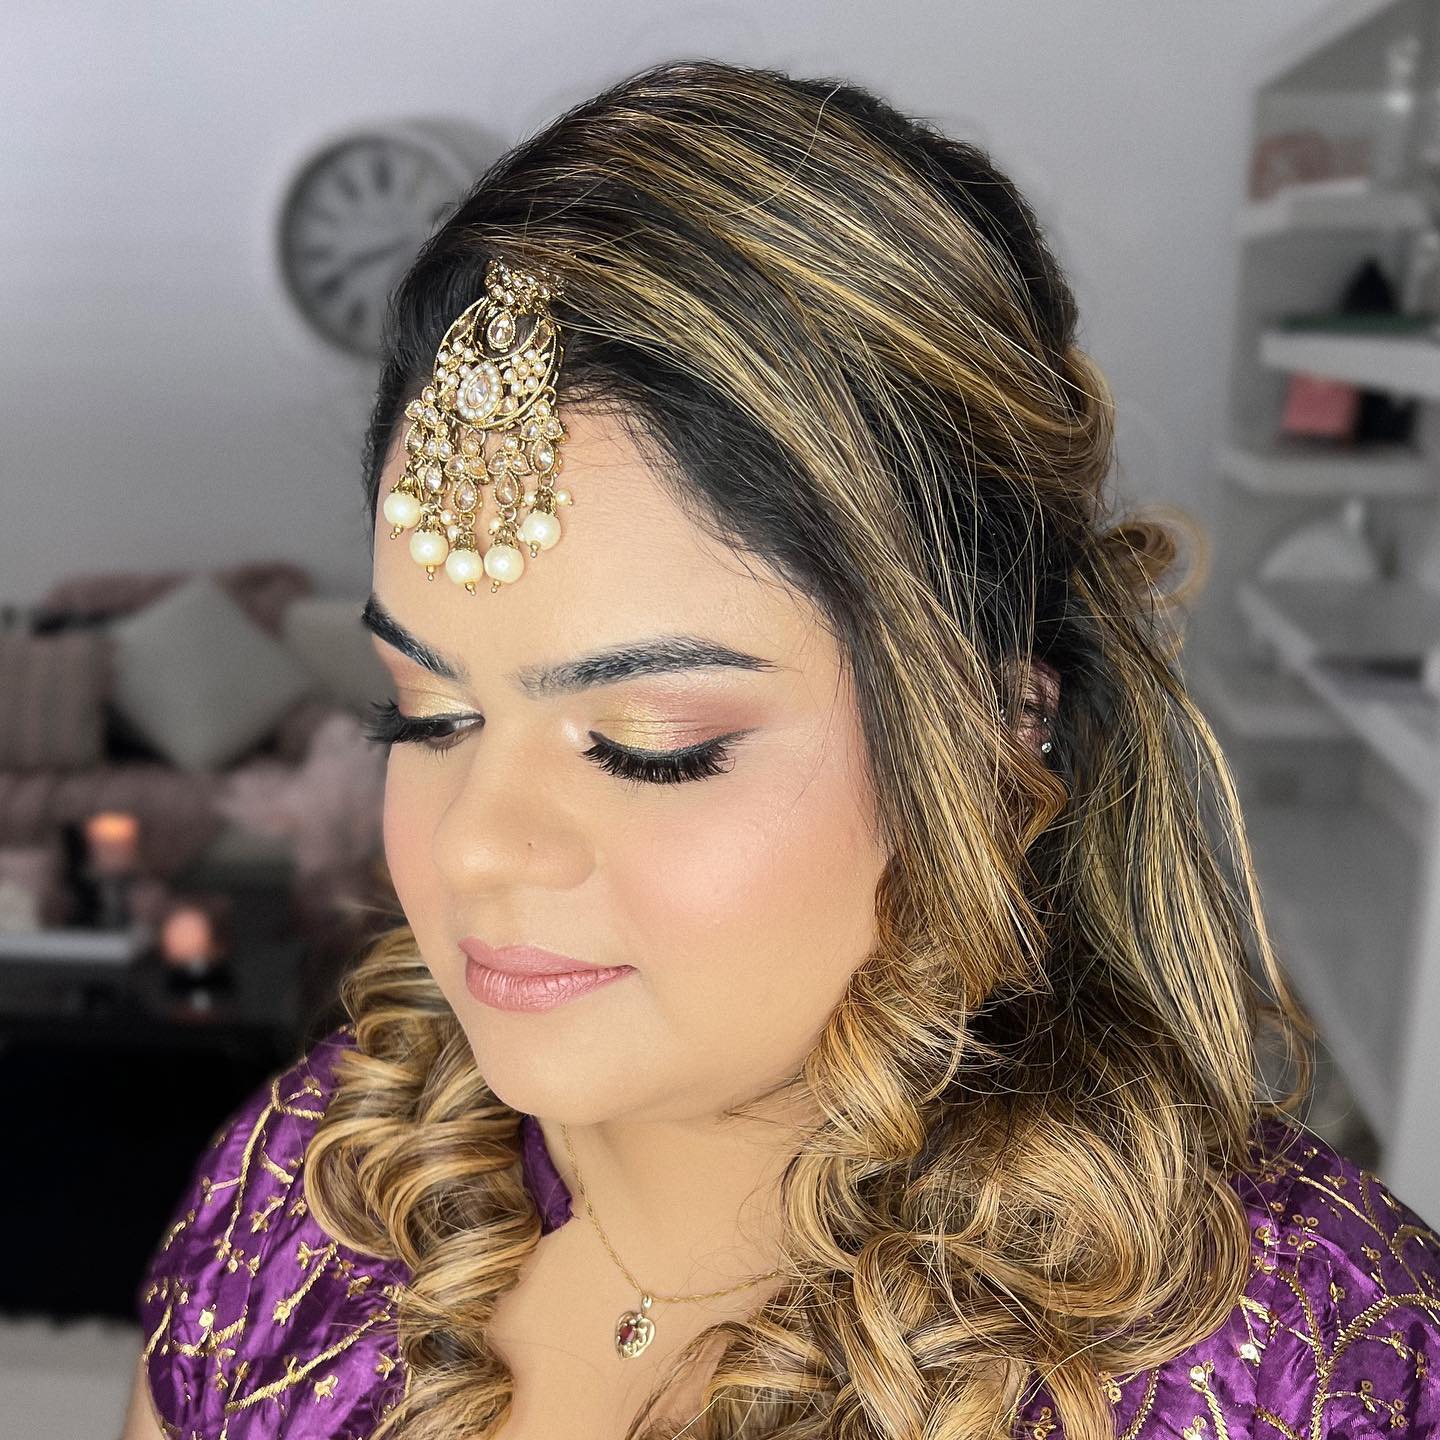 ✨D A R S H I K A✨

Had the pleasure of glamming @ika_darsh once again for her cousin’s wedding! It’s an absolute delight when your clients return to you over and over again - that trust means a lot! 💖

———————————————————————————
❗️Taking all 2022/2023 bridal and 2022 non-bridal bookings! Secure a booking for your next event via the link in my bio.
———————————————————————————
❗️1:1 Personal Makeup Lessons Now Available. Enquire via the website in bio for more information.
———————————————————————————
#makeupartistsydney  #sydneymakeupartist #sydneyhmua  #100wattskin #glowyskin #maccosmetics #guestmakeup #flawlessskin #glammakeup #indianwedding #weddingmakeup #indianbride #receptionbride #boldeyeshadow 
 #dewyskin #glameyemakeup #glameyes #ootd #gunmetalsmokeyeye #photoshoot #instafashion #smokeyeye #makeup #statementeyemakeup #sydneymakeupartists #indianmakeupartist #partymakeup #glam #fullglam